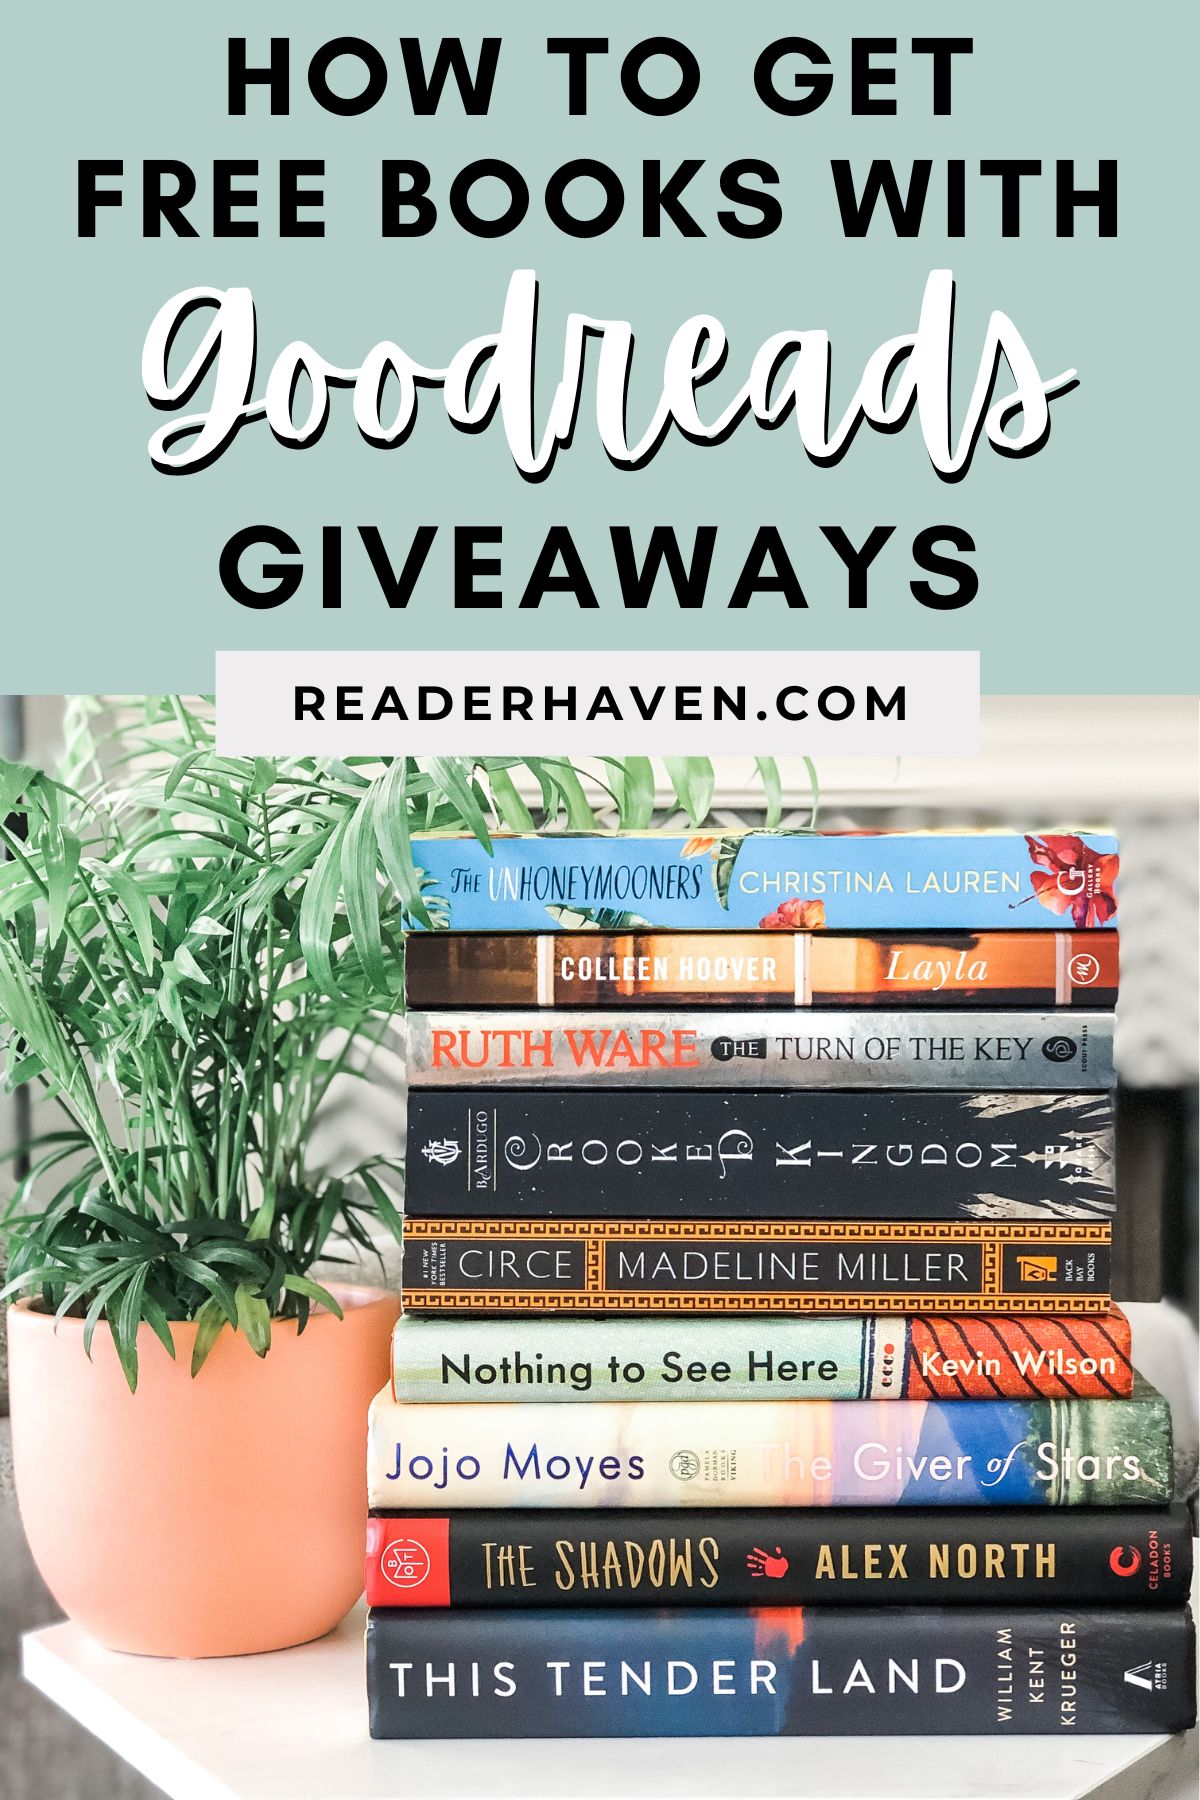 how to get free books with Goodreads giveaways